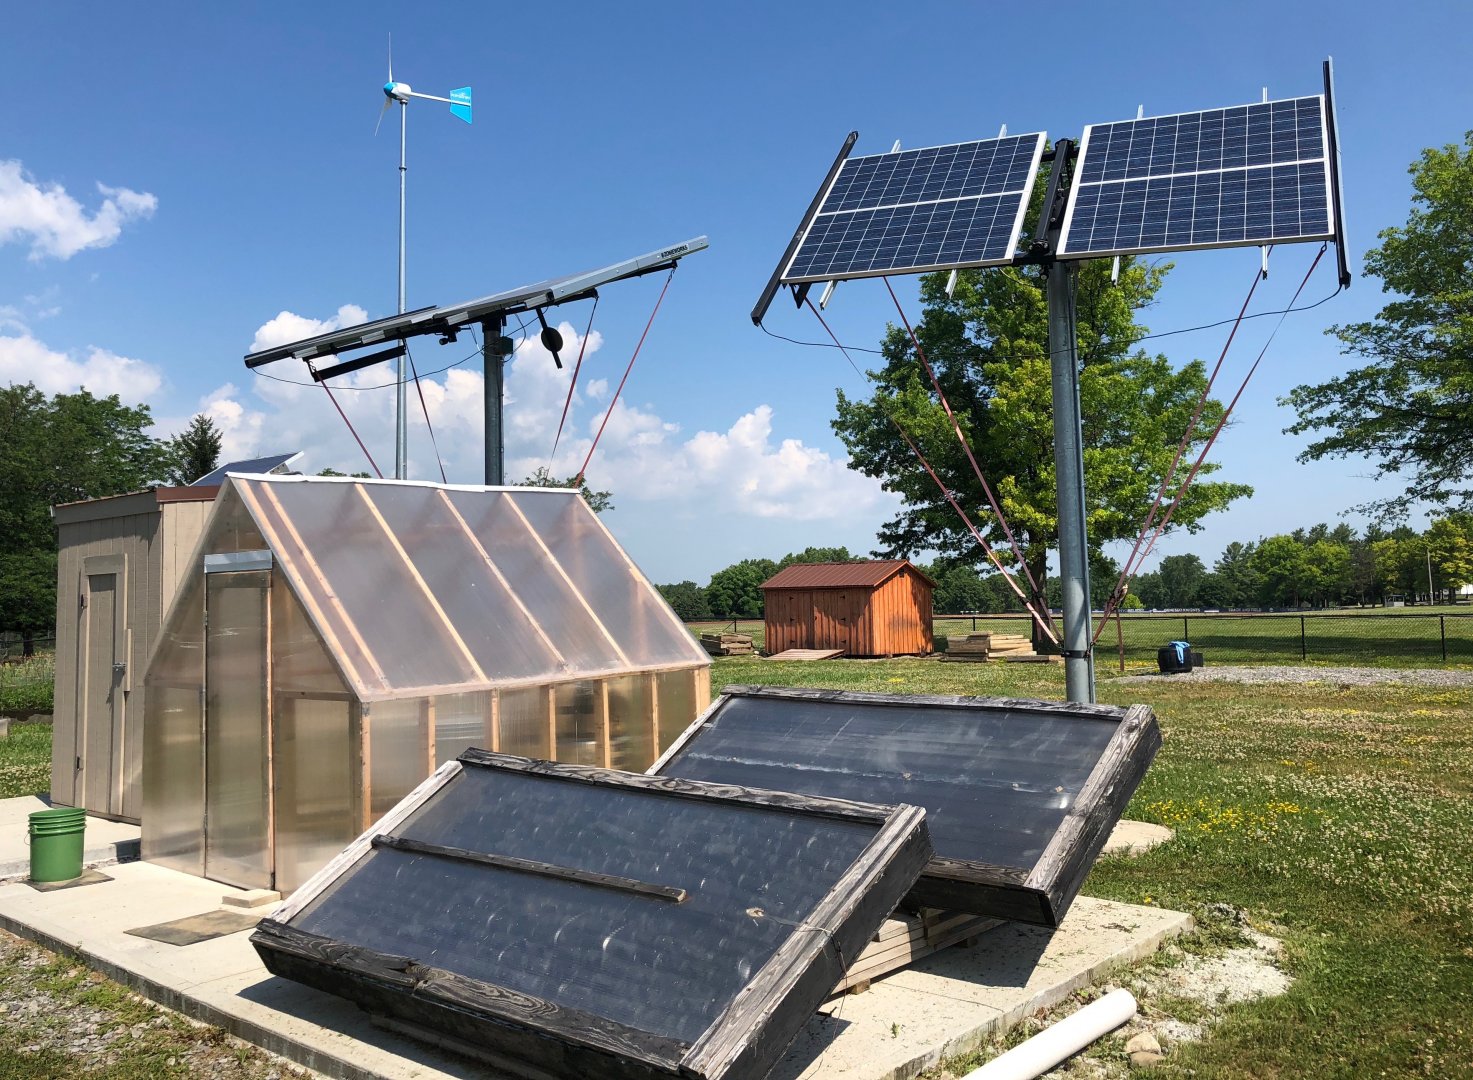 The renewable energy installations in the eGarden include solar collectors, two solar arrays, a wind turbine, and a greenhouse. 